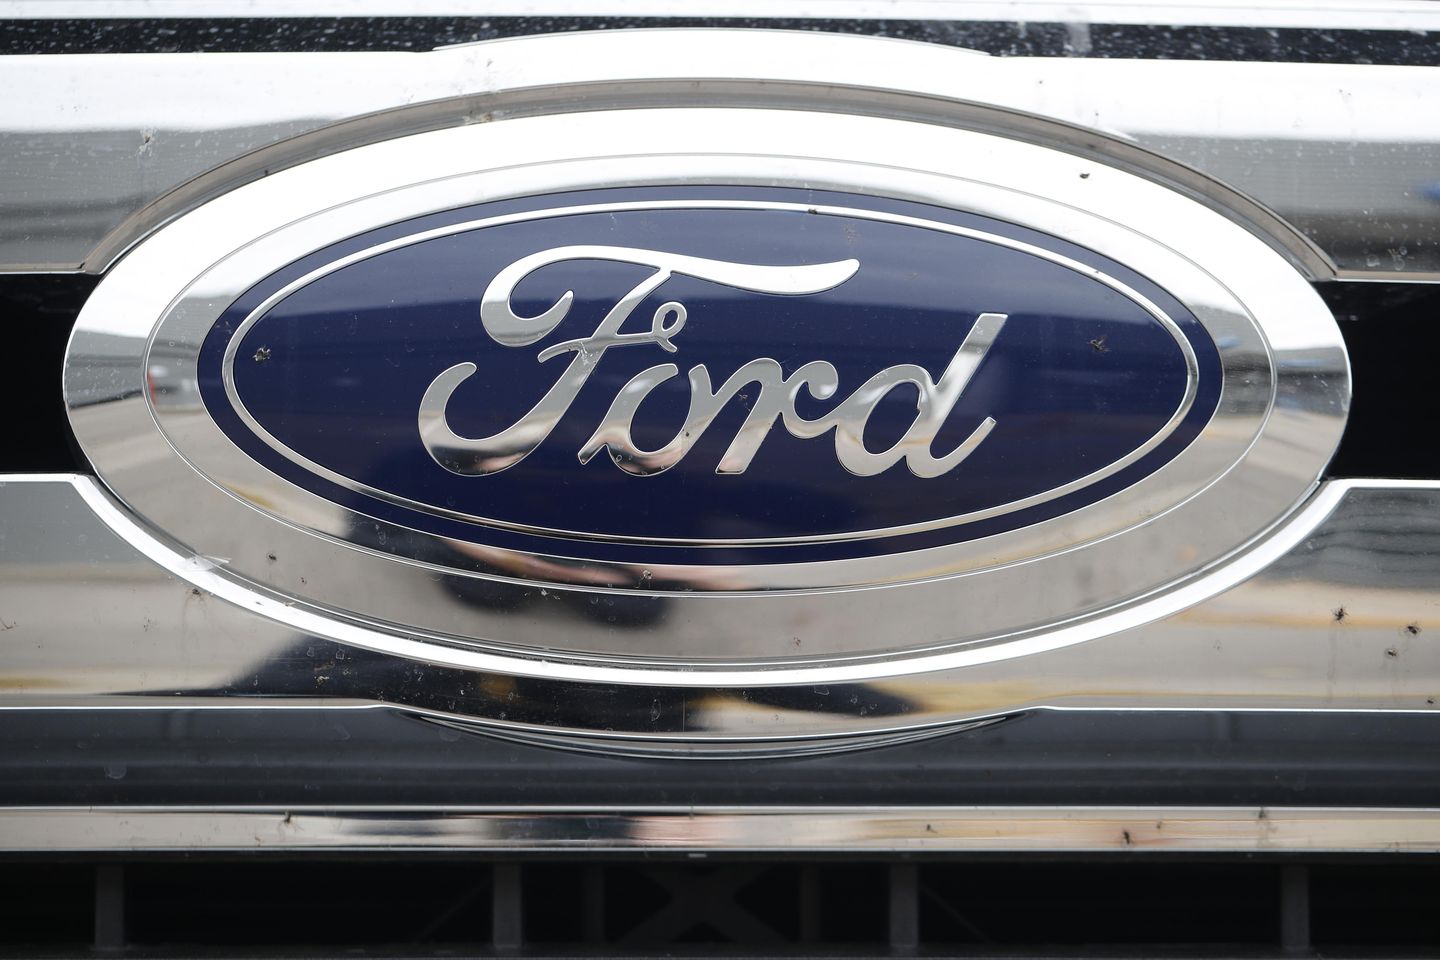 Newly published Ford patent would allow company to shut down key features if driver misses payments